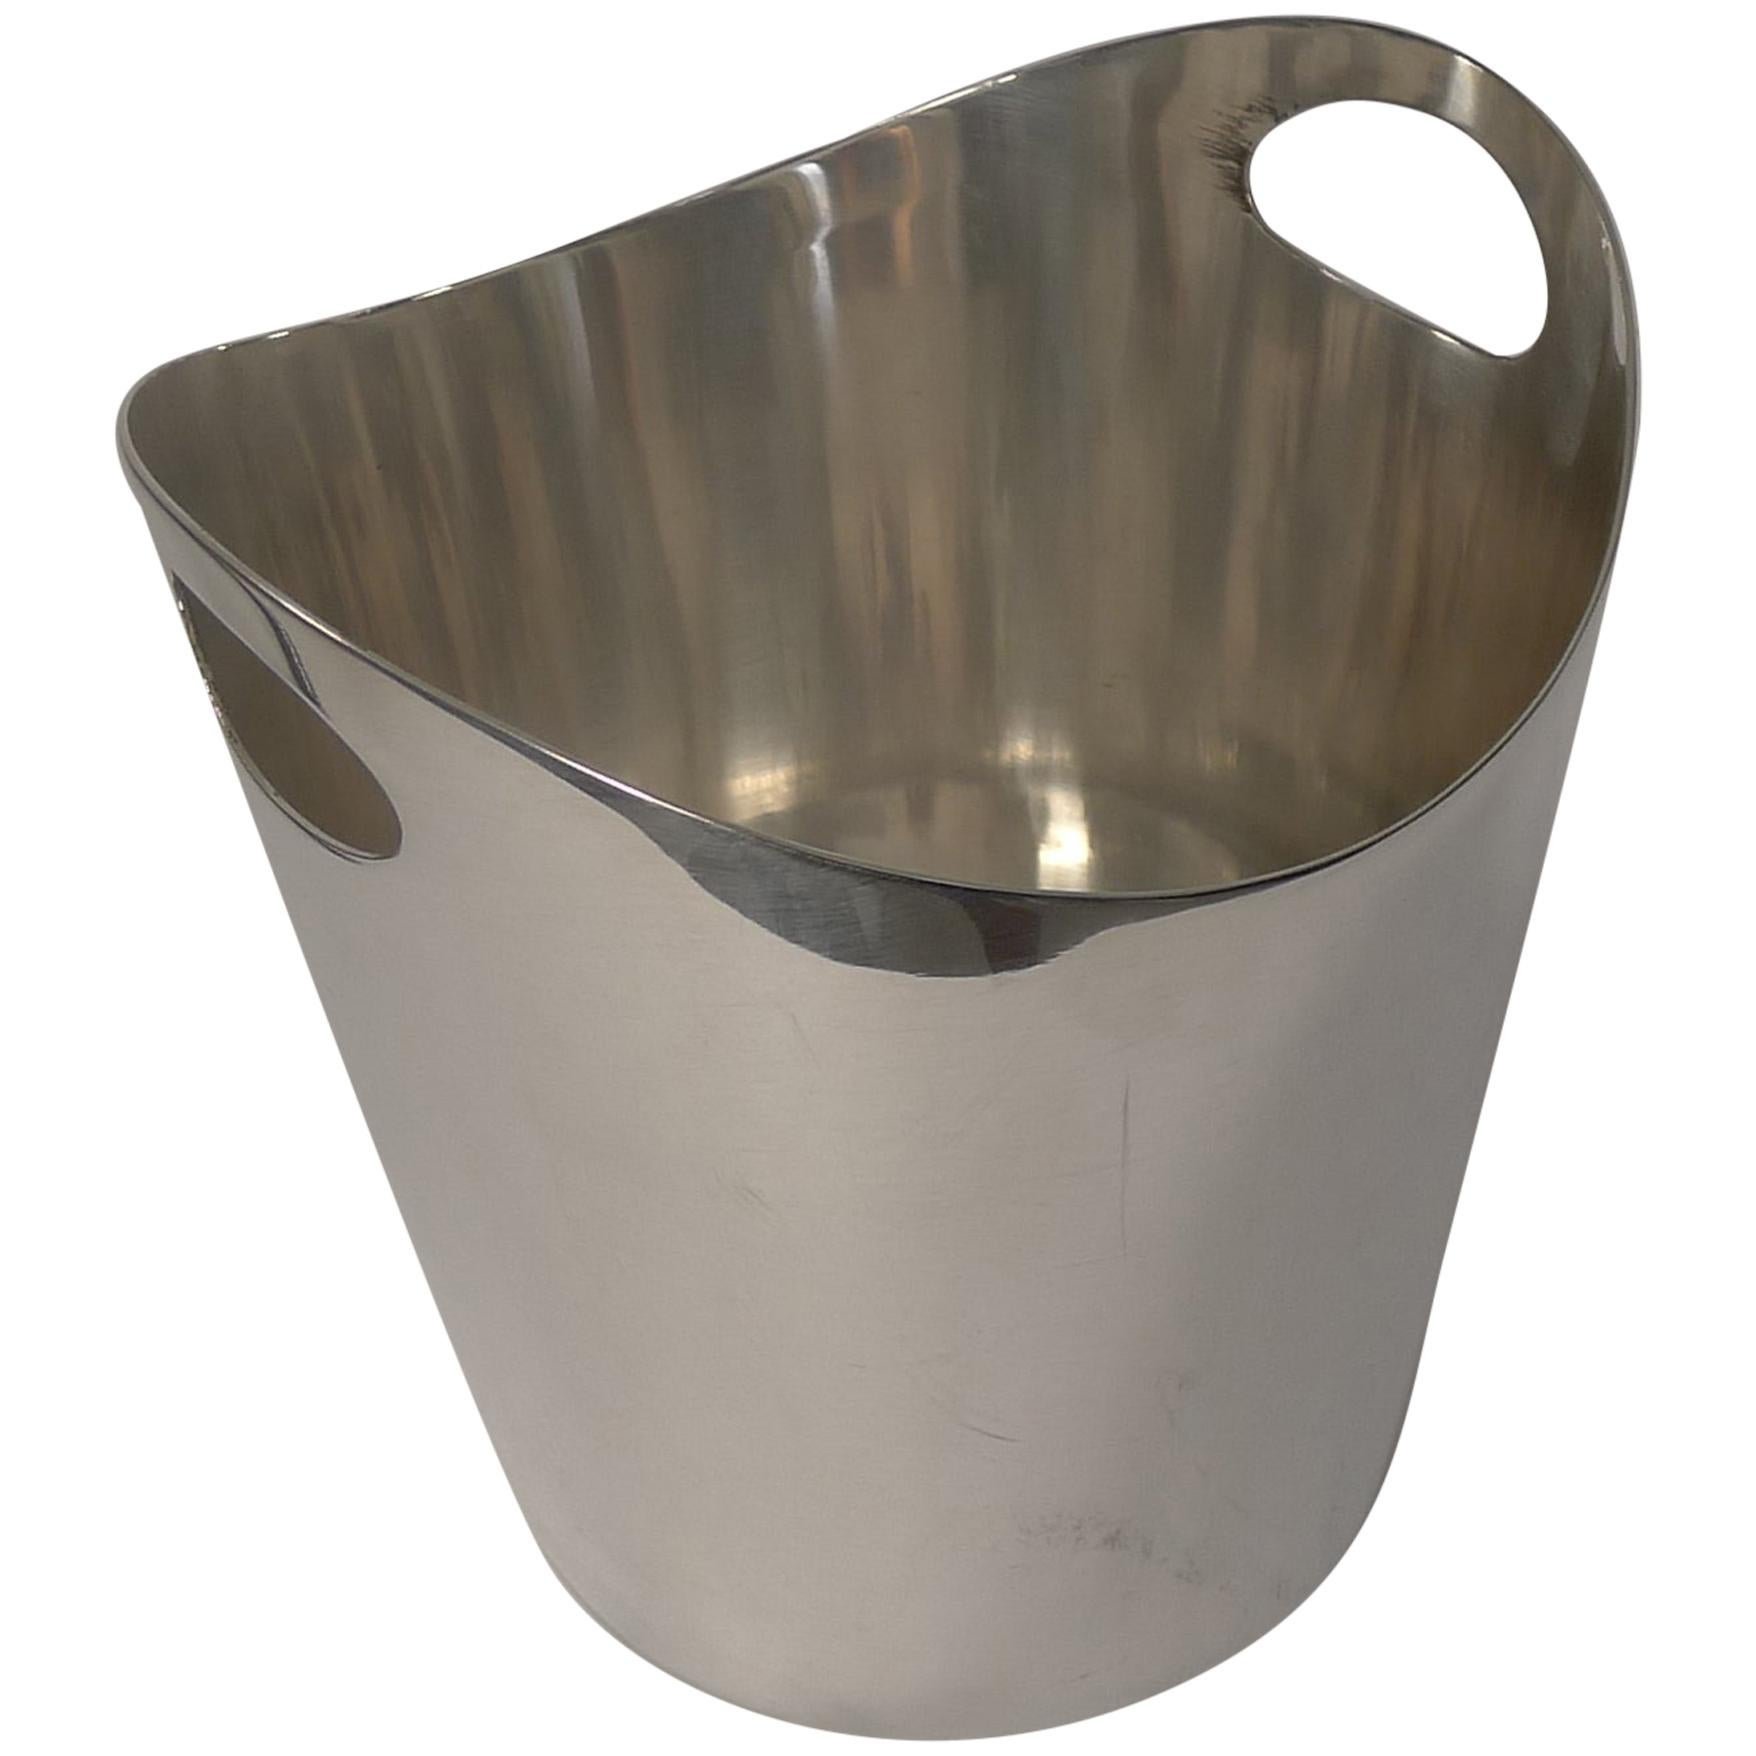 Rare English Modernist Silver Plated Ice Bucket by Walker & Hall, 1958 For Sale